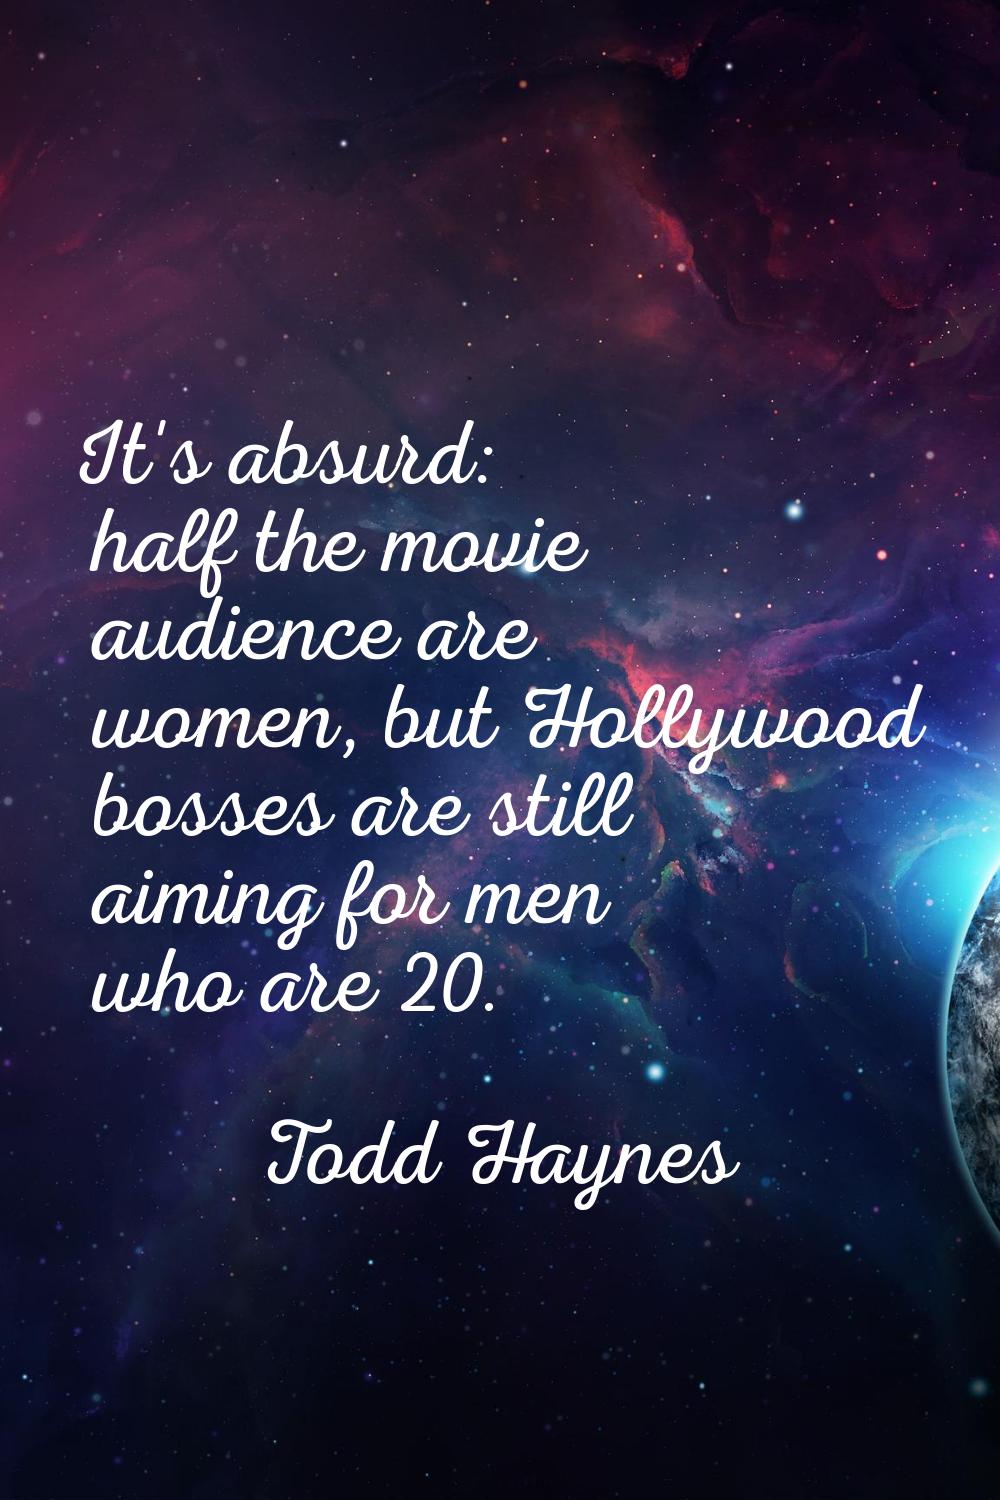 It's absurd: half the movie audience are women, but Hollywood bosses are still aiming for men who a